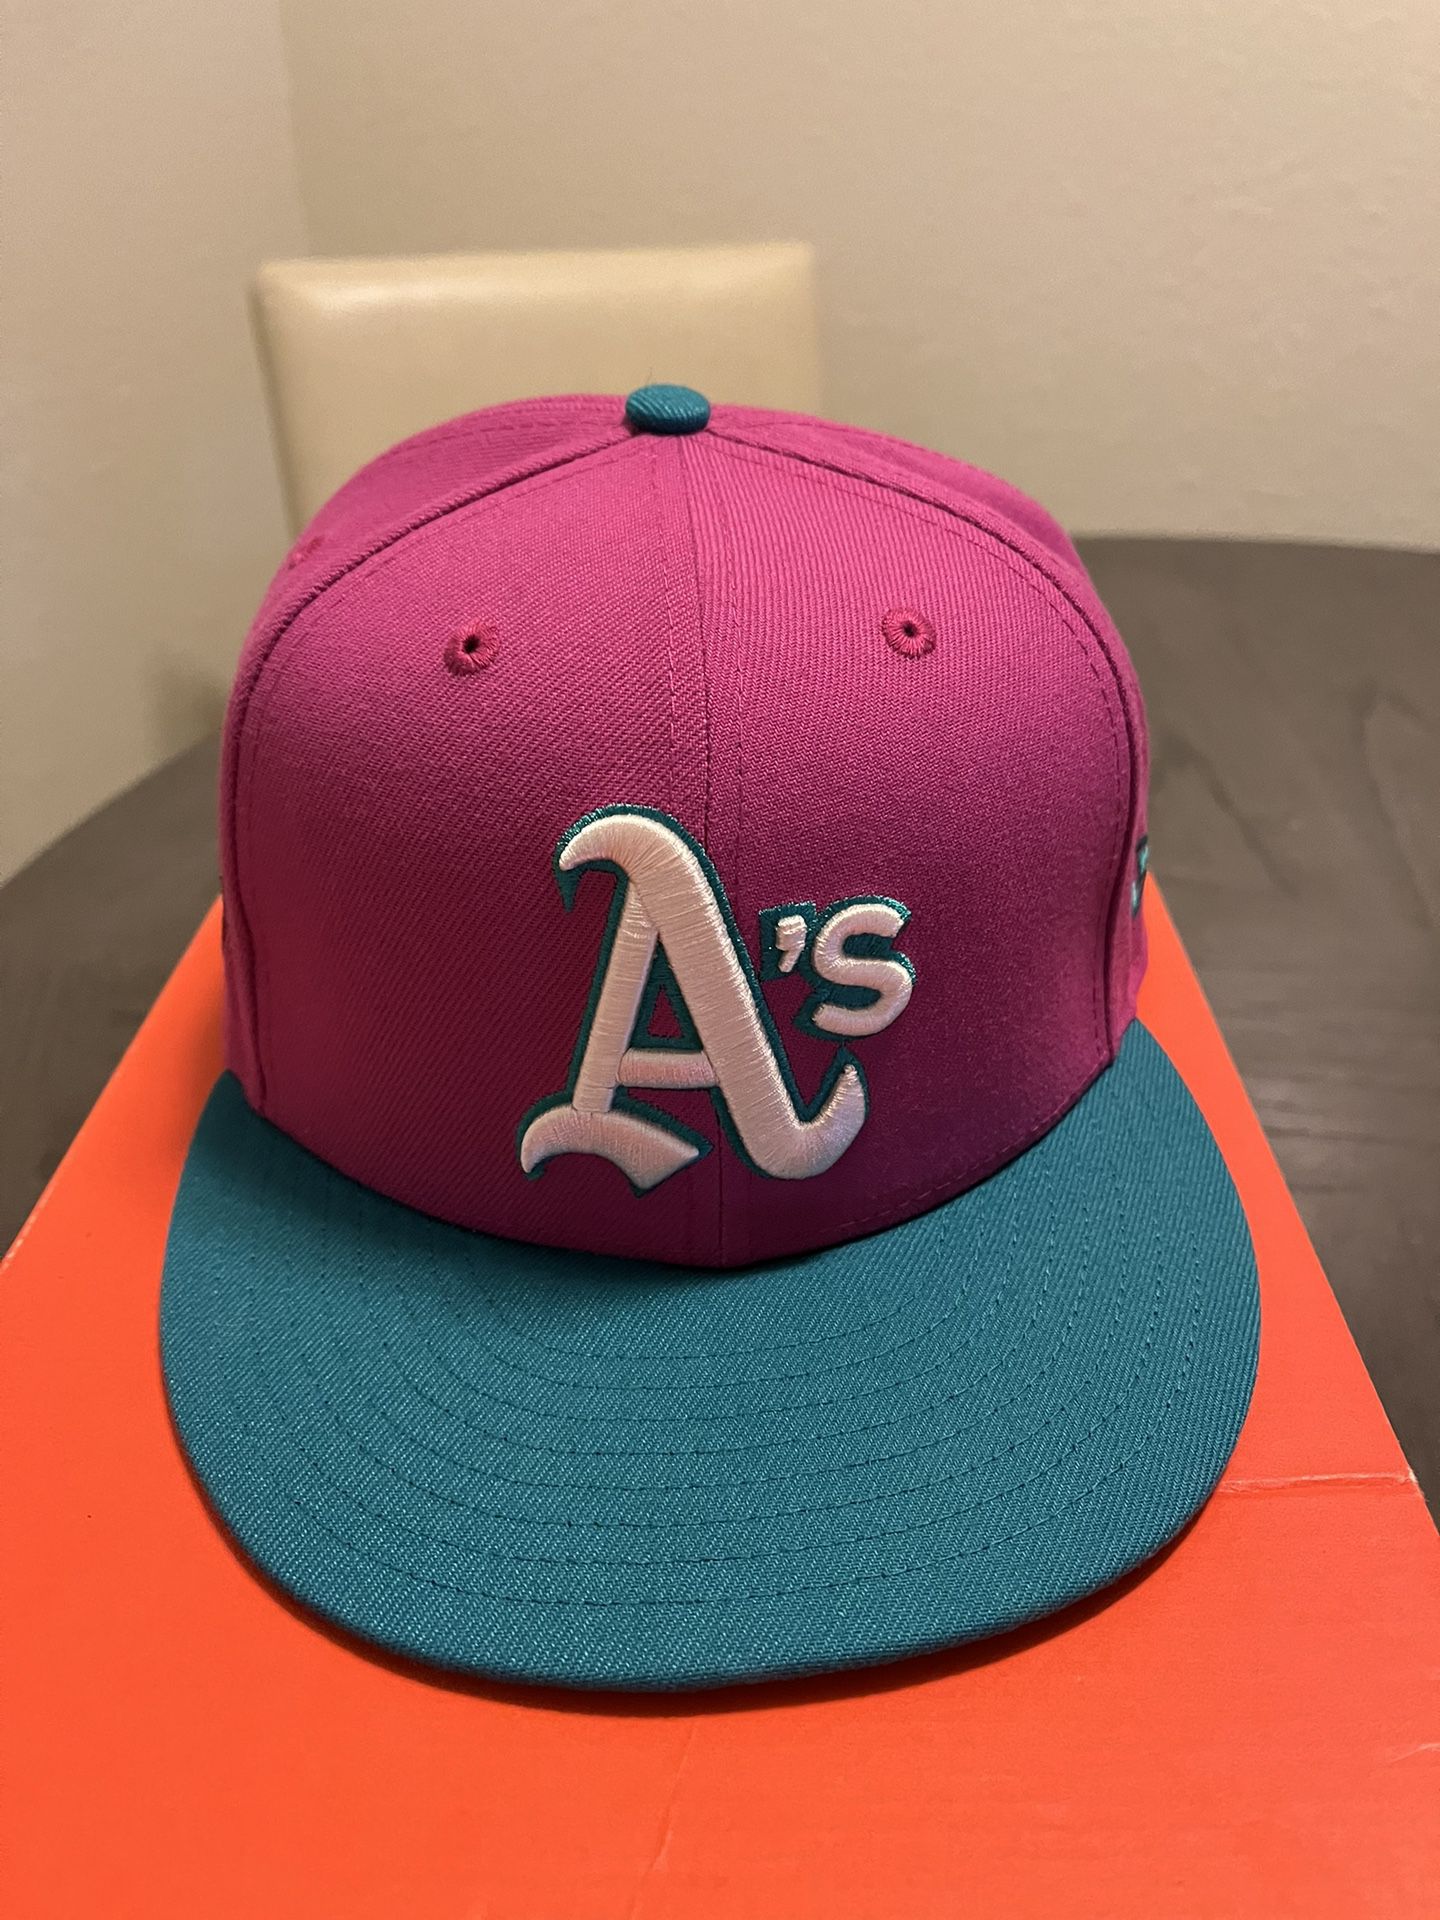 A’s Fitted Hat Sz 7 5/8